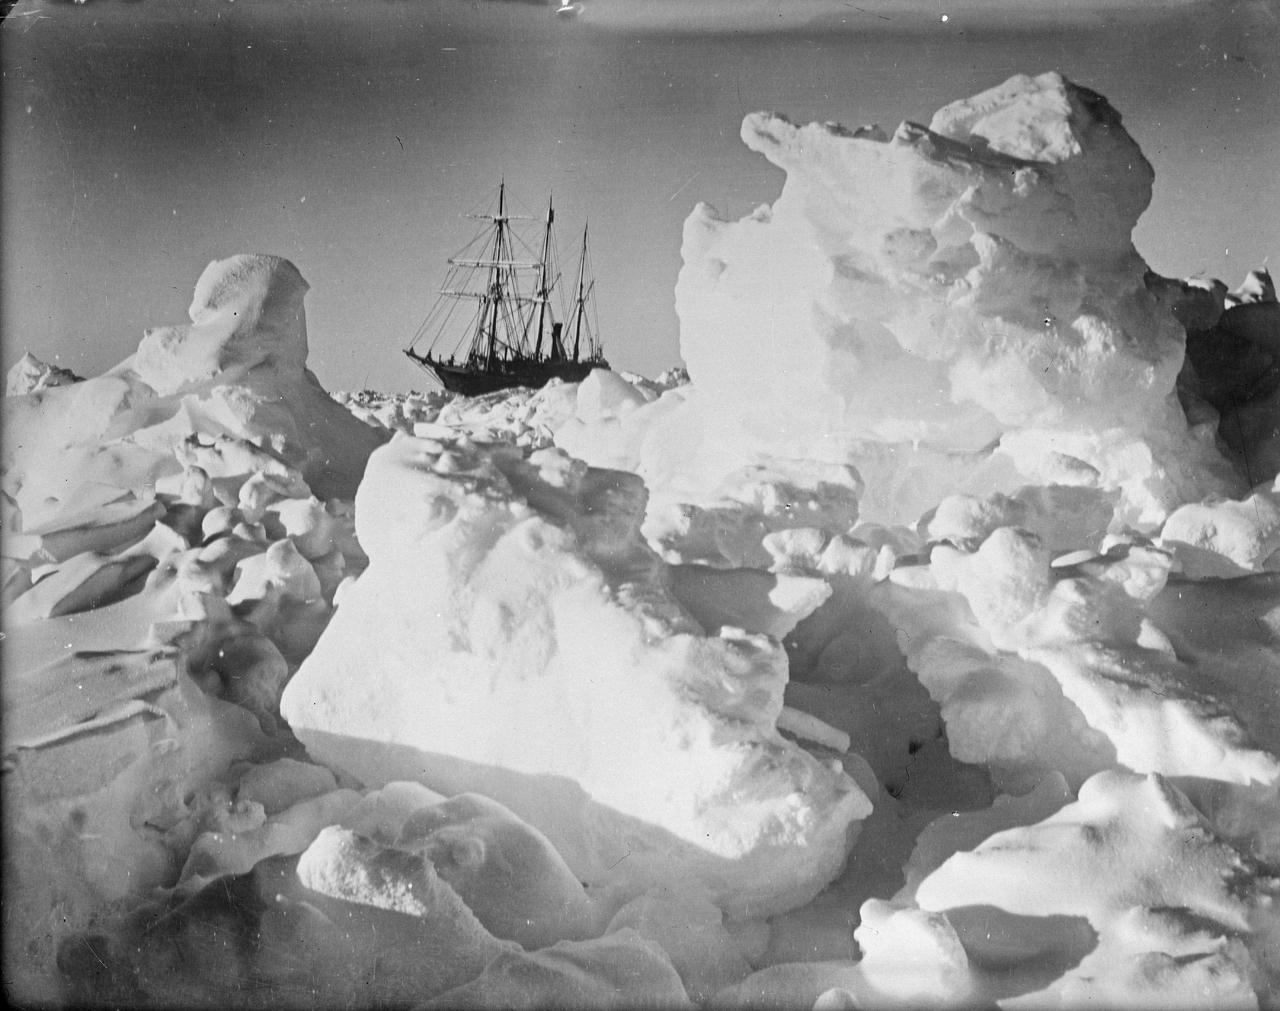 'Endurance' in the Ice during Ernest Shackleton's expedition to Antarctica (P1, National Maritime Museum)